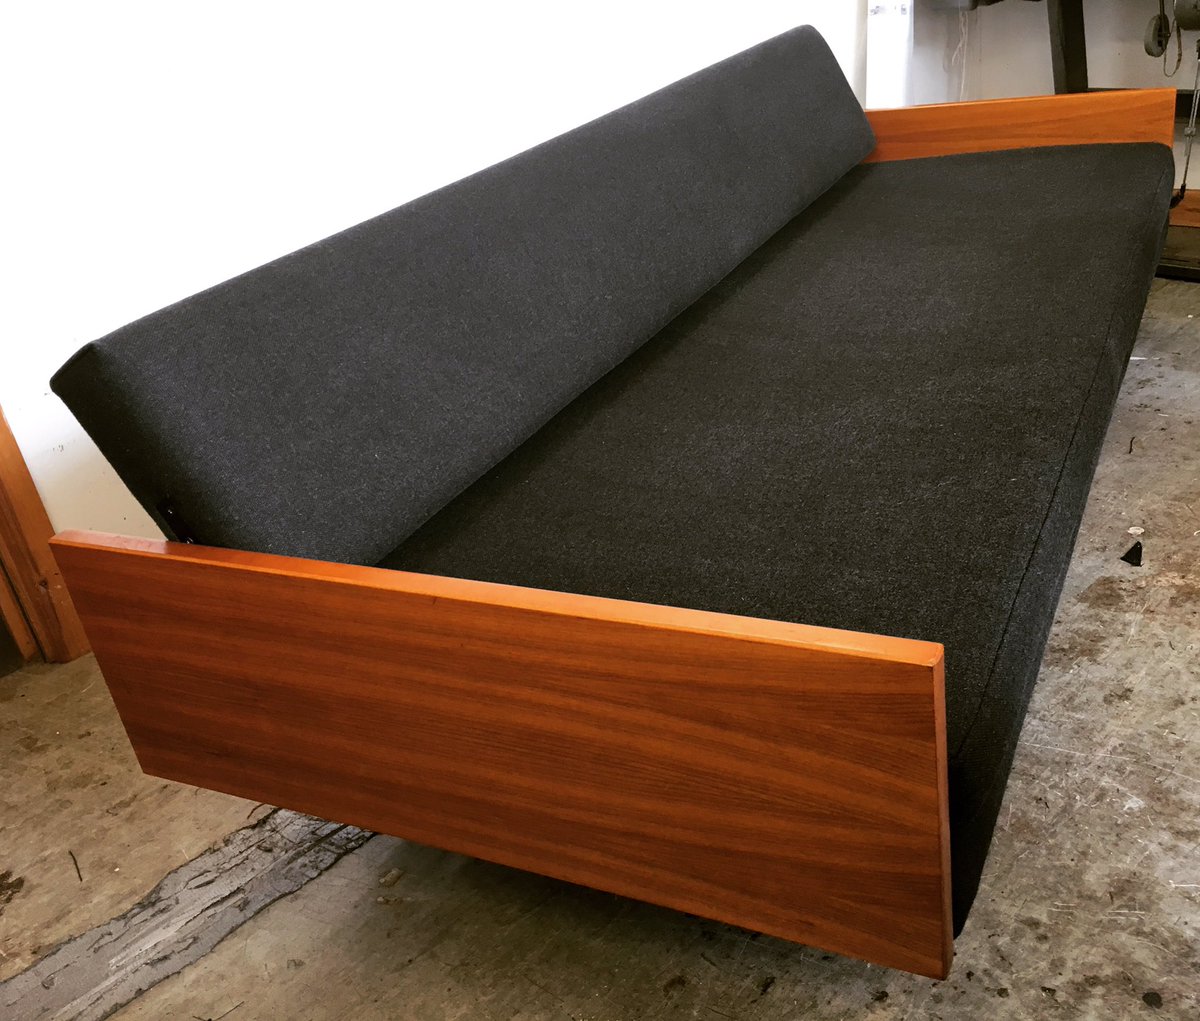 Robin Day Sofa Bed 1957 arms restored and upholstered in @camira Mainline Flax. Super chic!!#robinday #midcenturydesign #modernupholstery